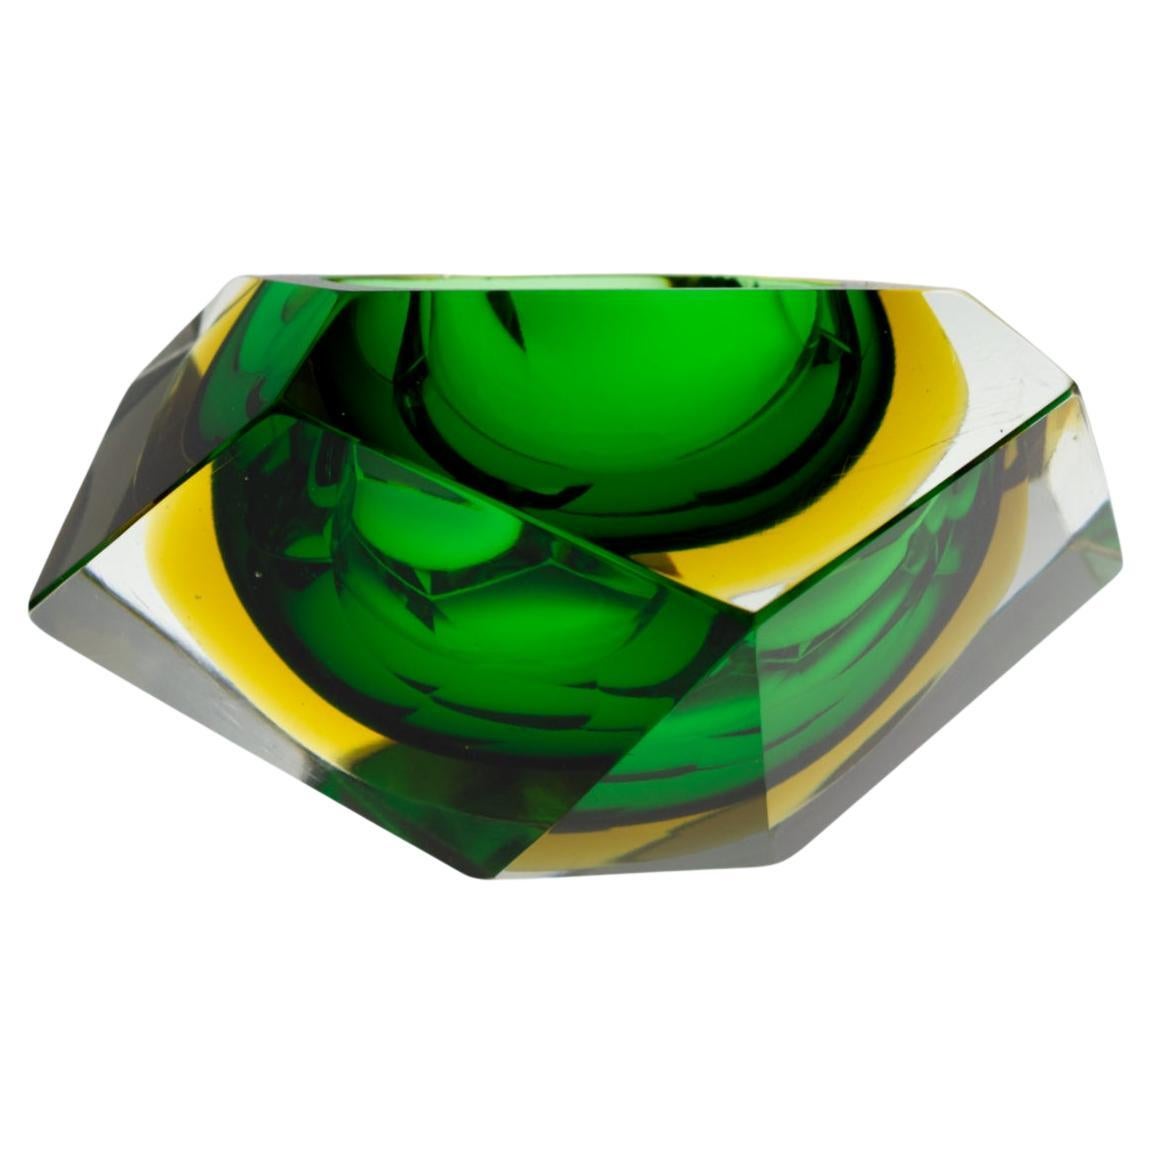  Murano Sommerso  Green Faceted Glass  Bowl by Flavio Poli 1960´s